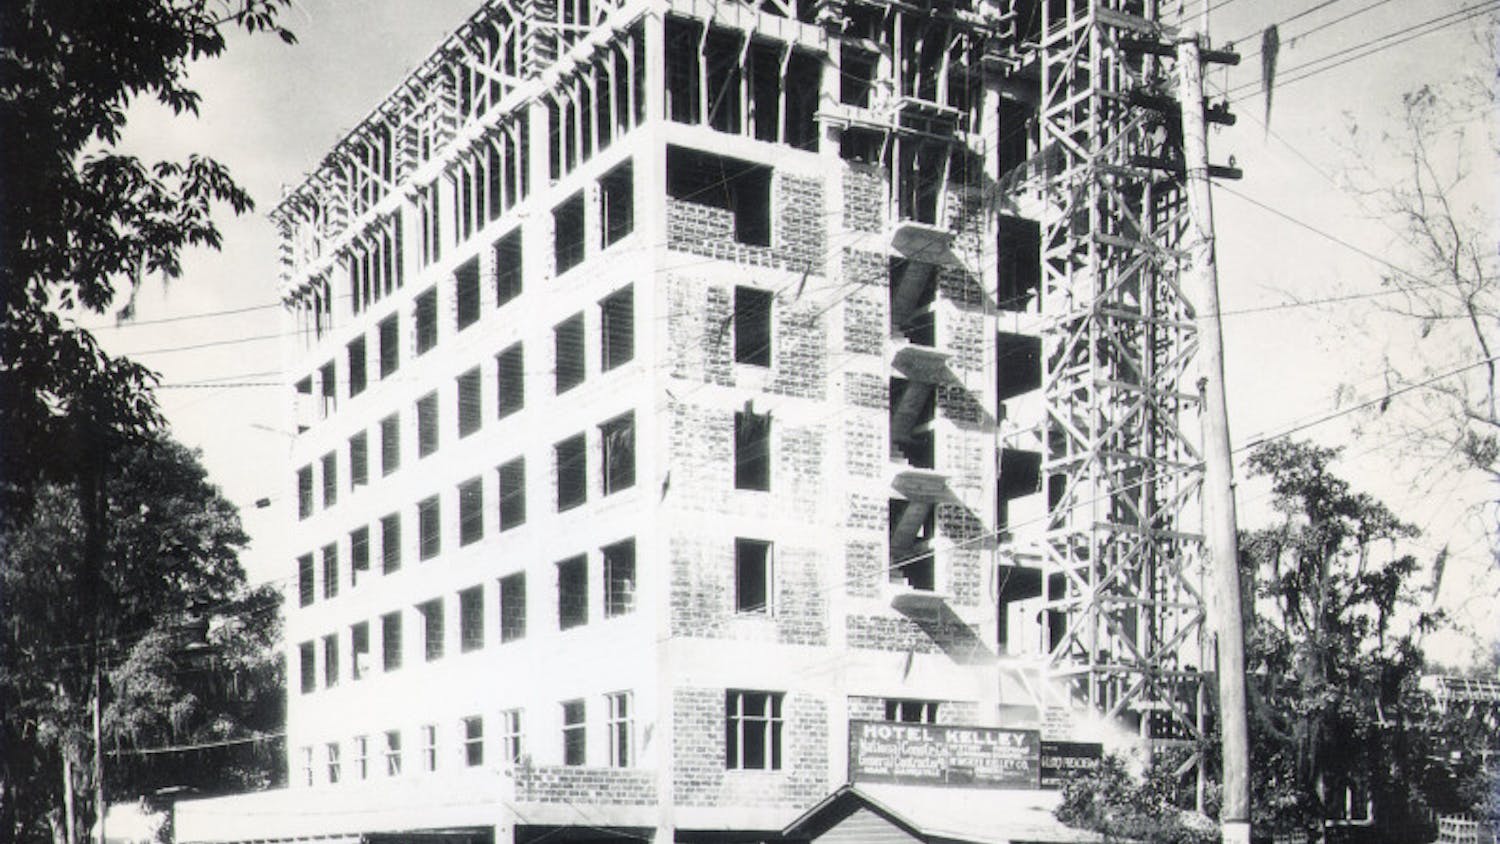 The Seagle Building was built in the 1920s, but construction was resumed in 1936 after delays caused by the Great Depression. It never served as a hotel, despite being built for this purpose.